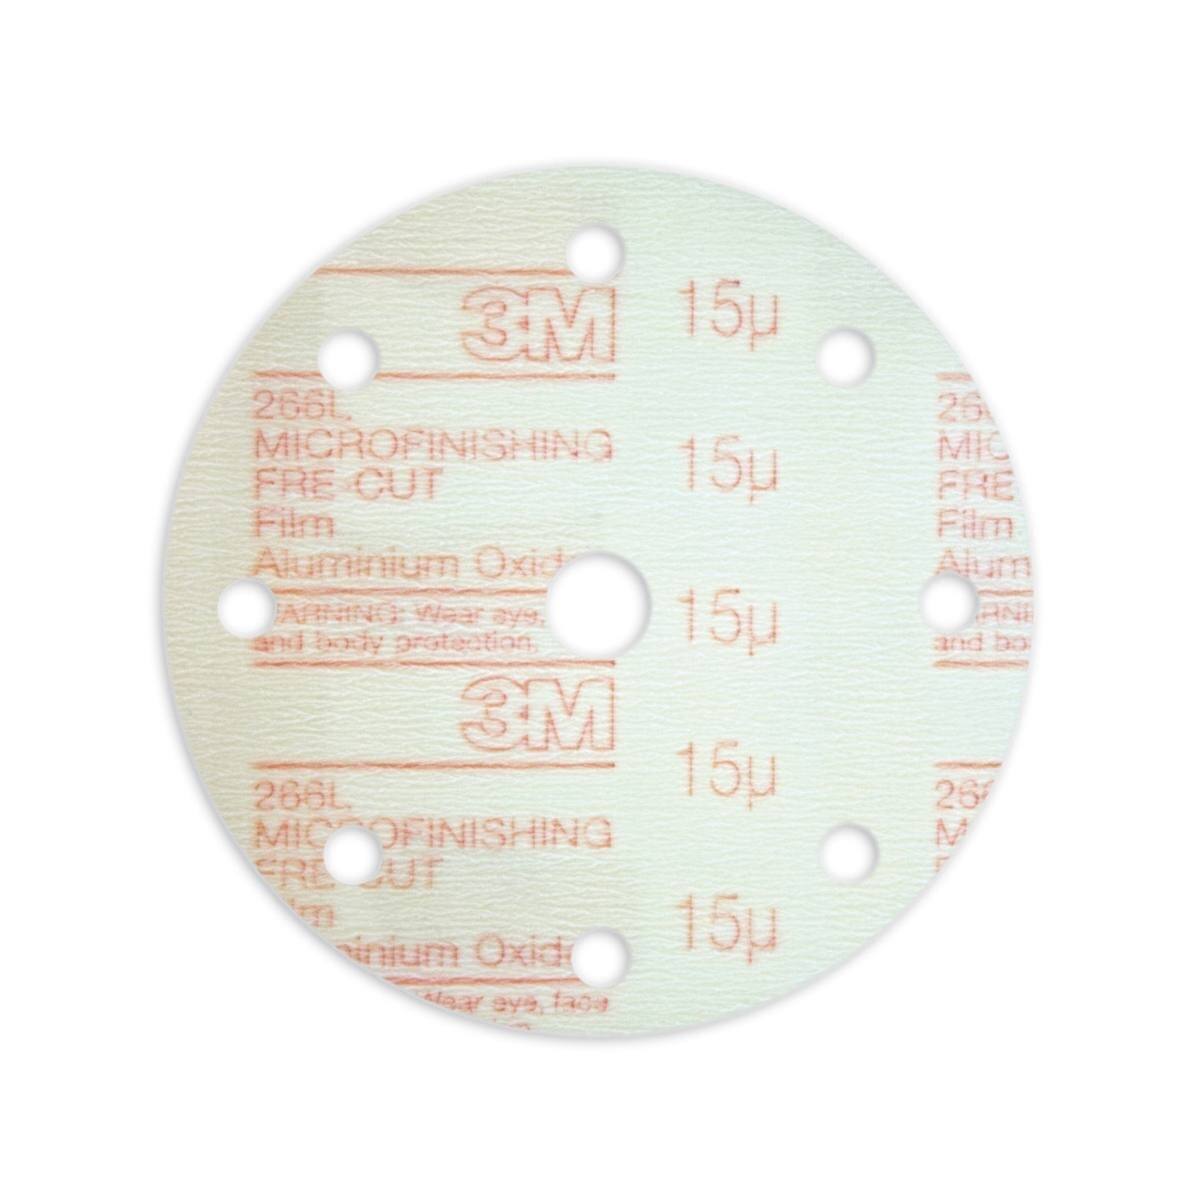 3M Hookit Velcro-backed microfinishing film disc 266L, 125 mm x 20 microns, non-perforated